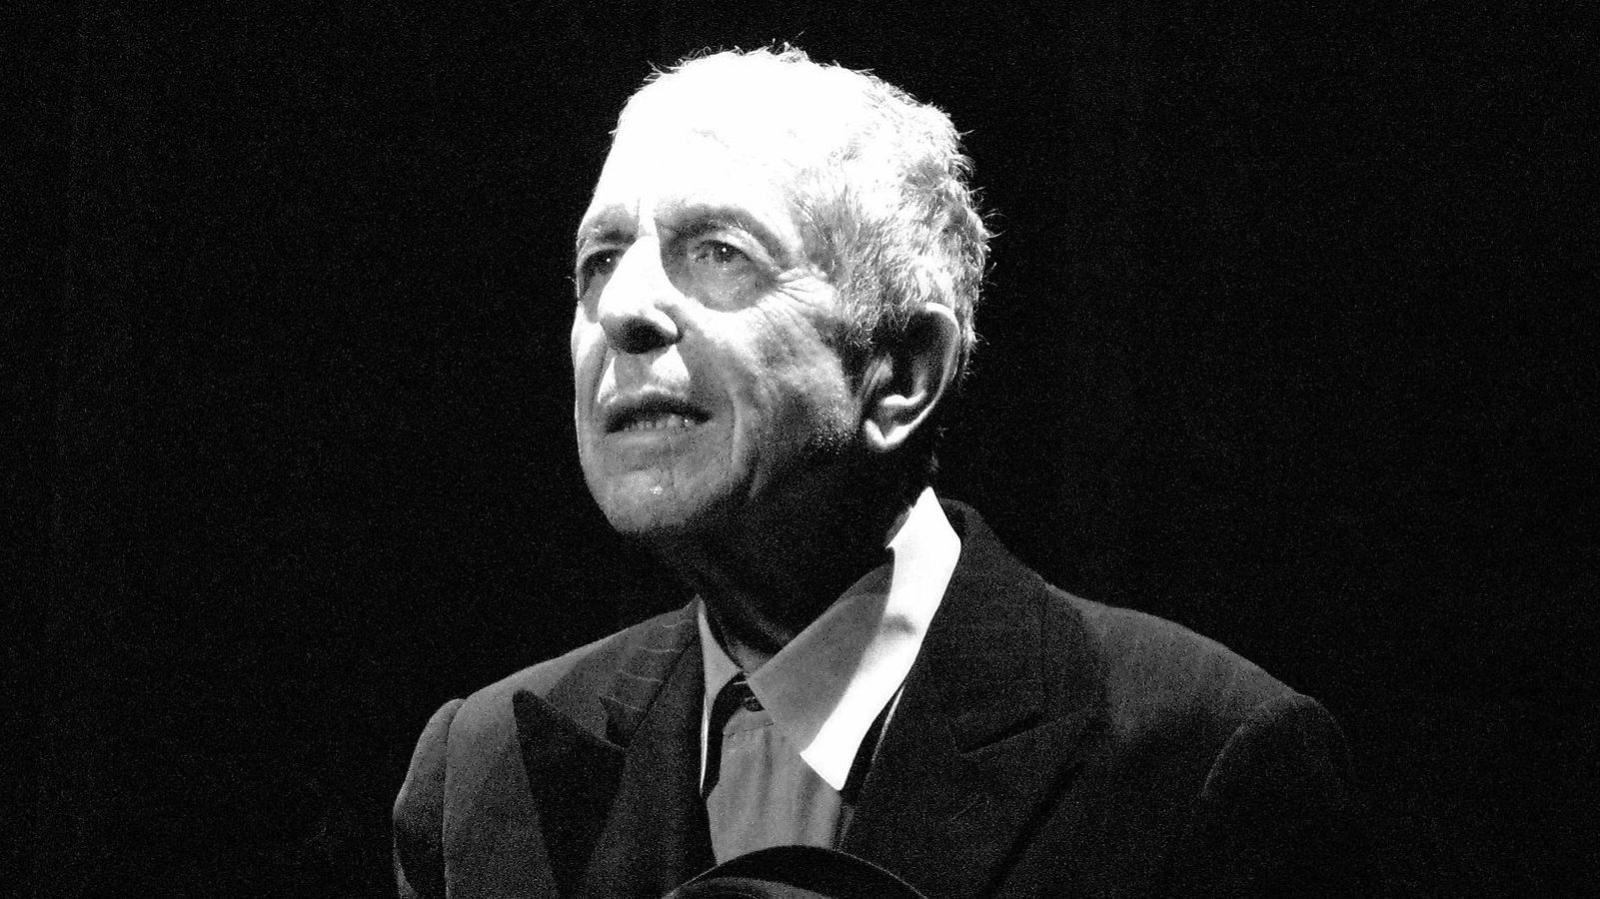 Posthumous Leonard Cohen collection on the way